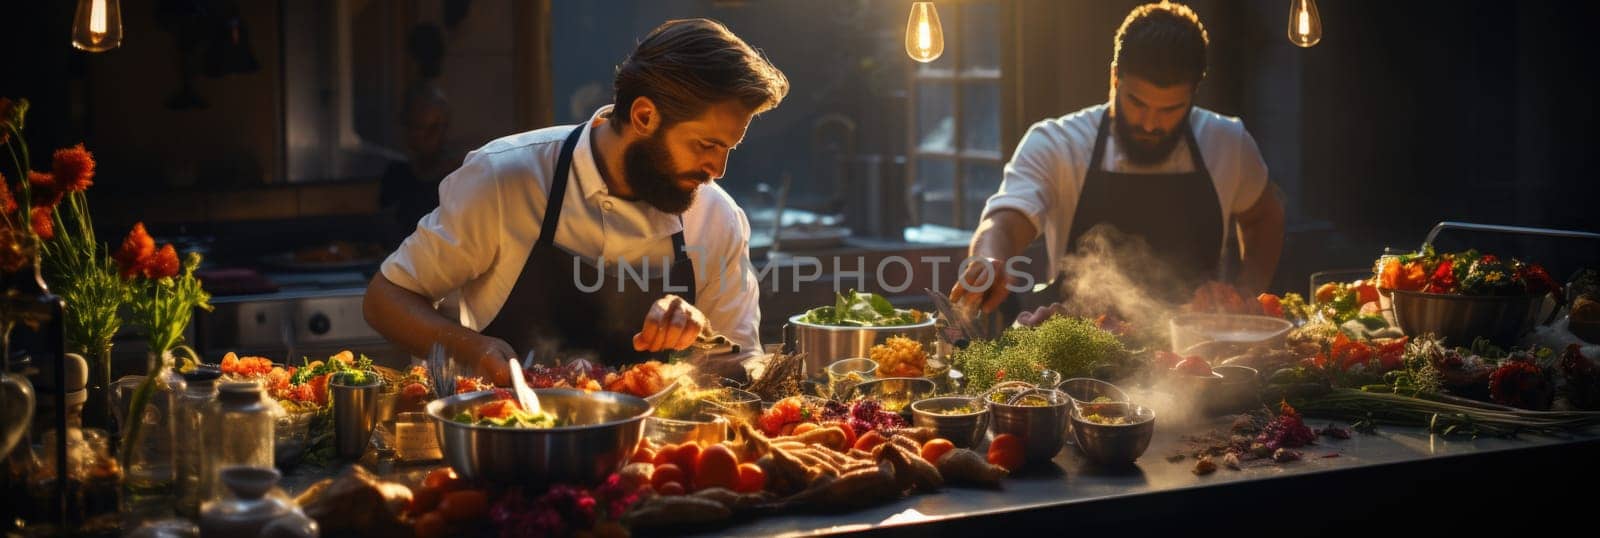 Couple Cooking Together in Kitchen by but_photo